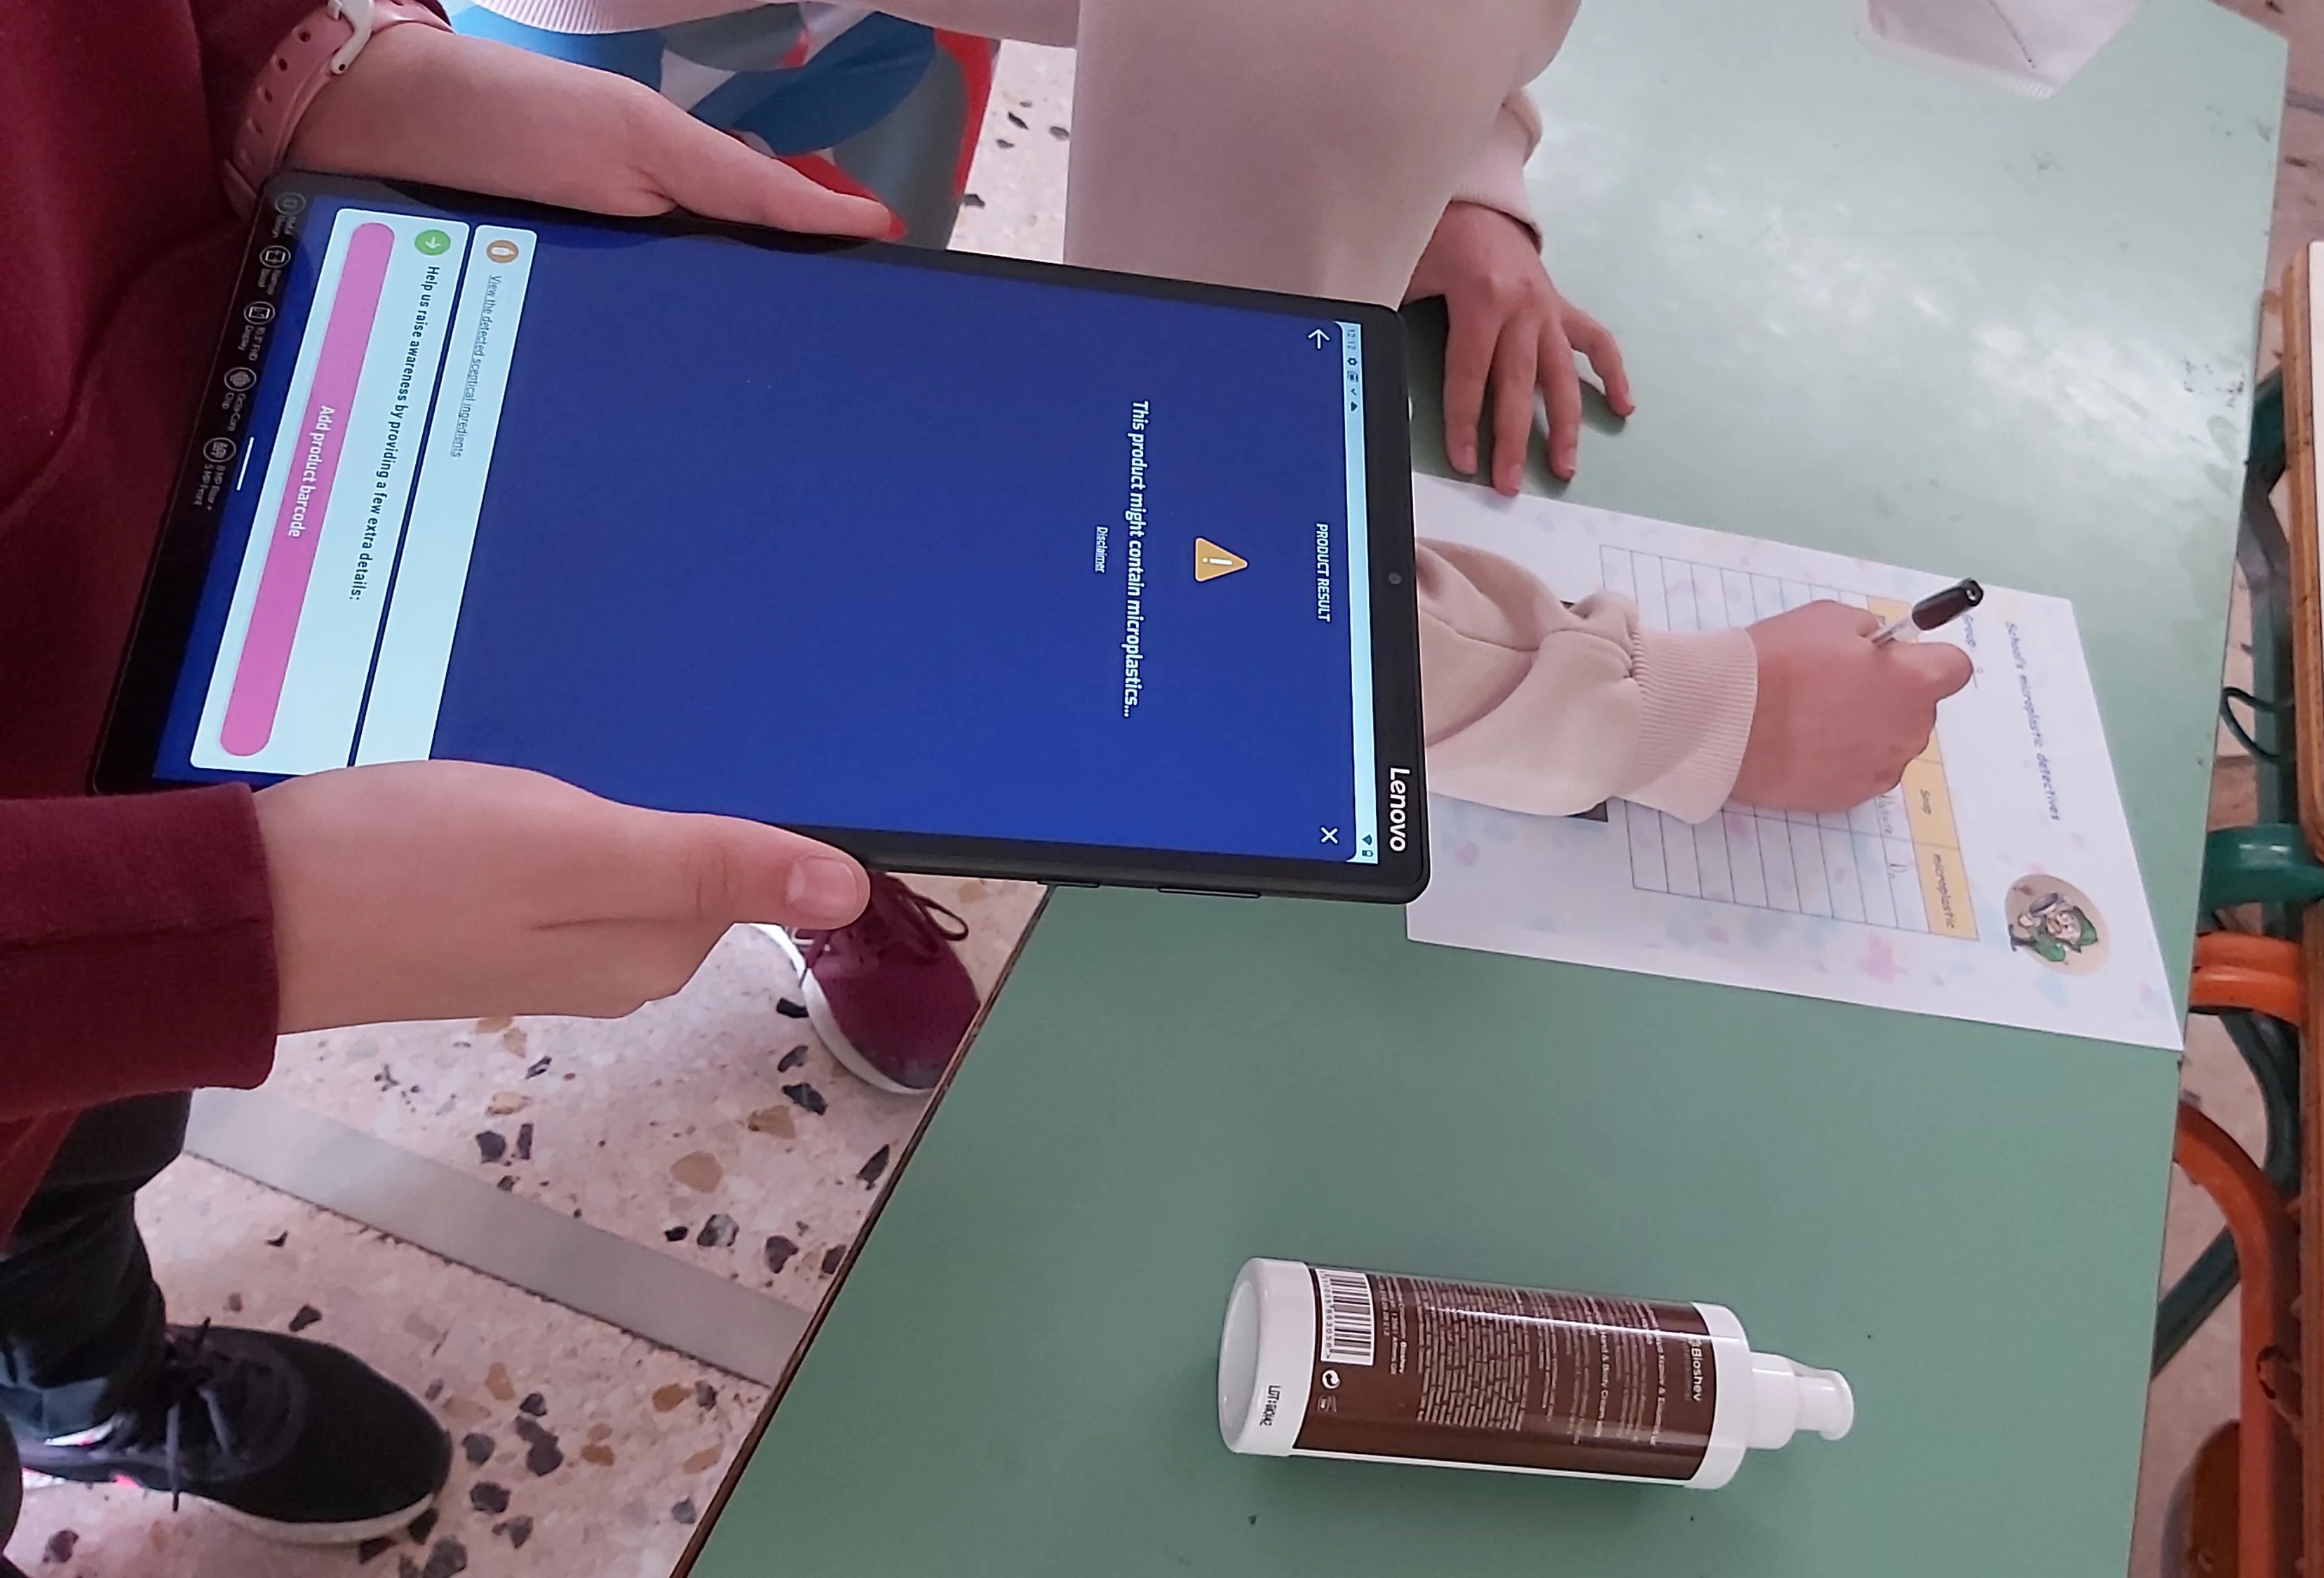 The young Citizen scientists collect and share data through the “Beat the Microbead” app